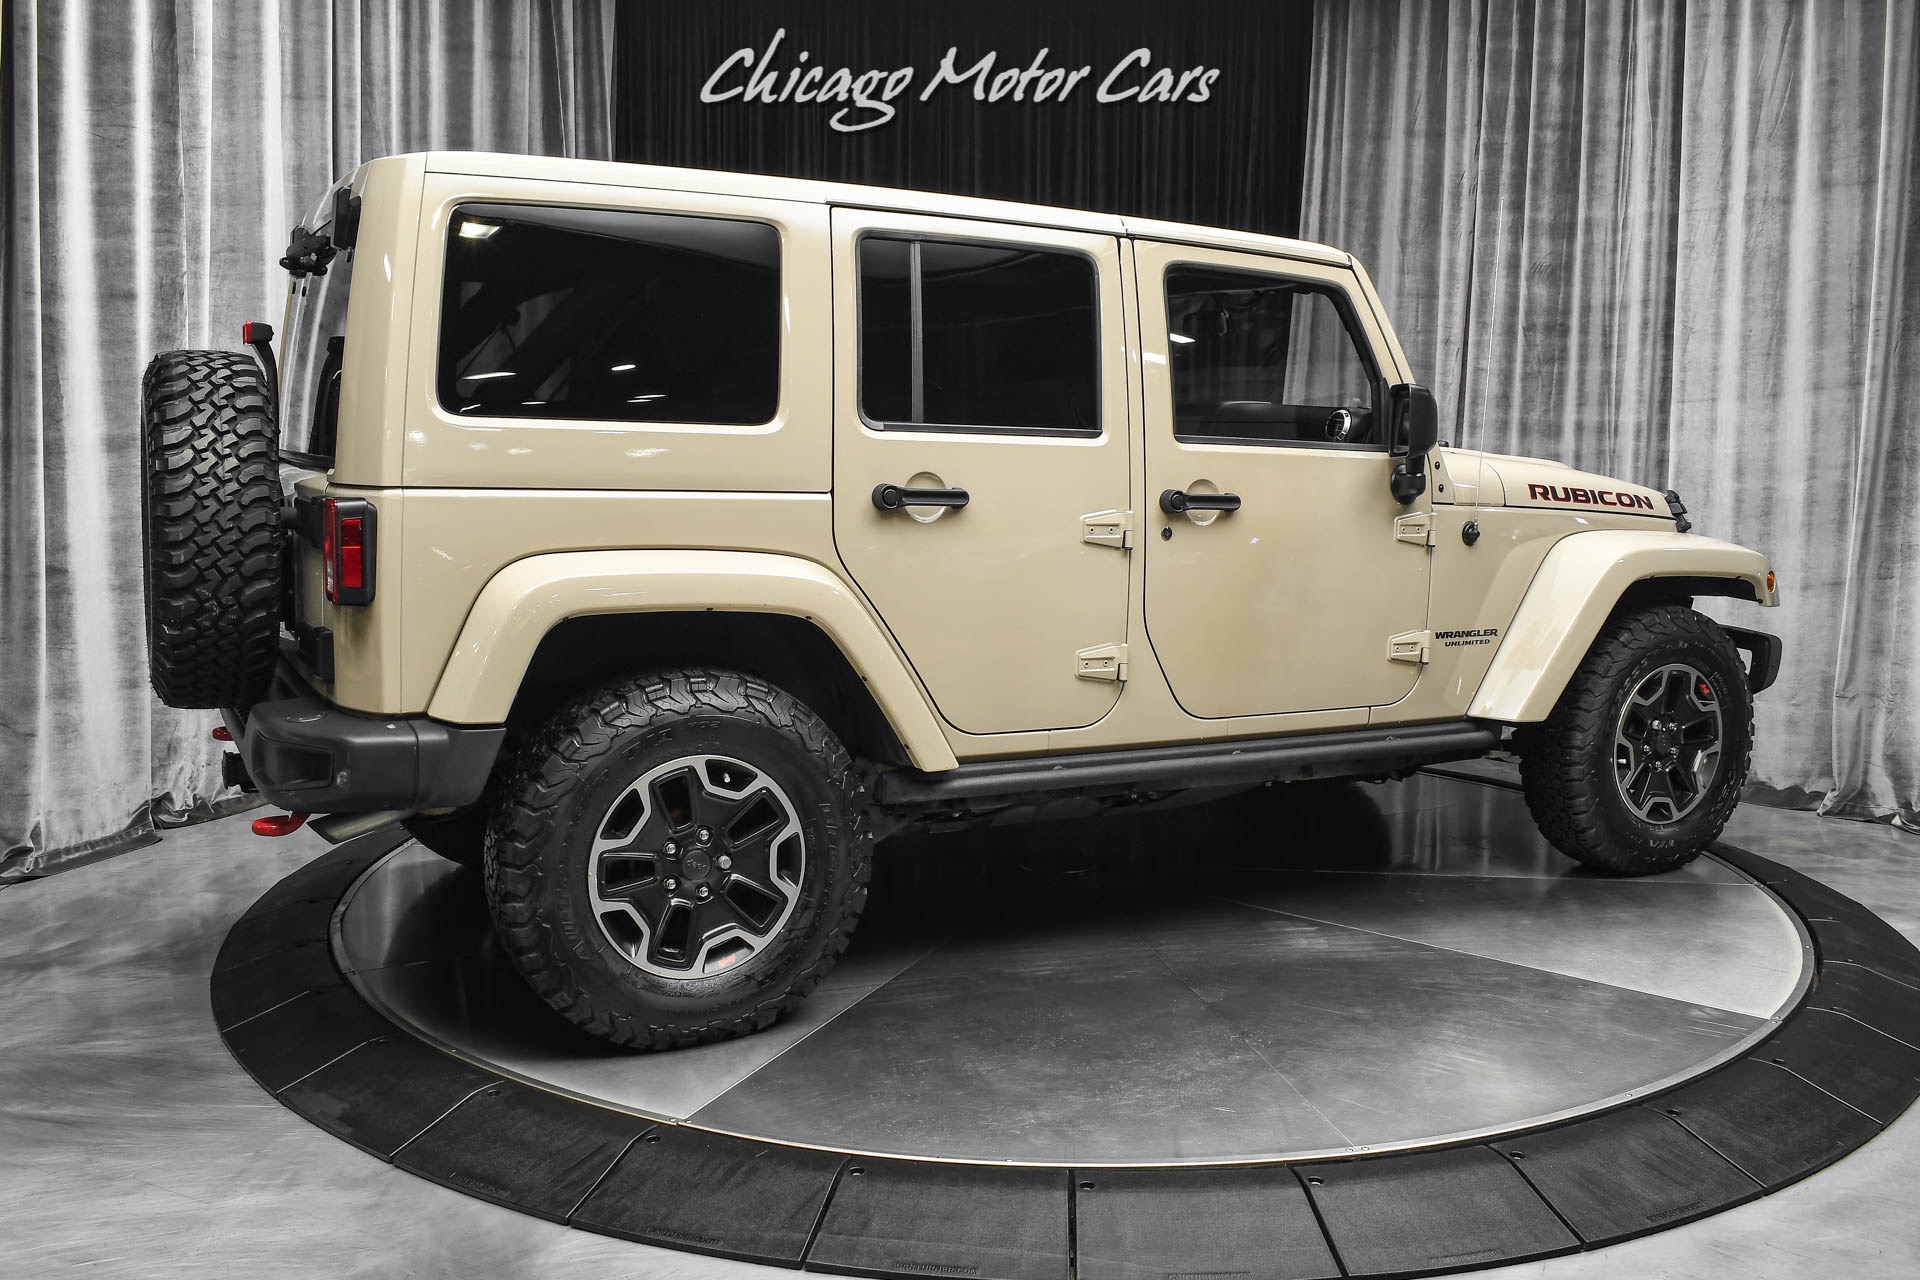 Used-2016-Jeep-Wrangler-Unlimited-Rubicon-Hard-Rock-RARE-Mojave-Sand-Serviced-49k-MSRP